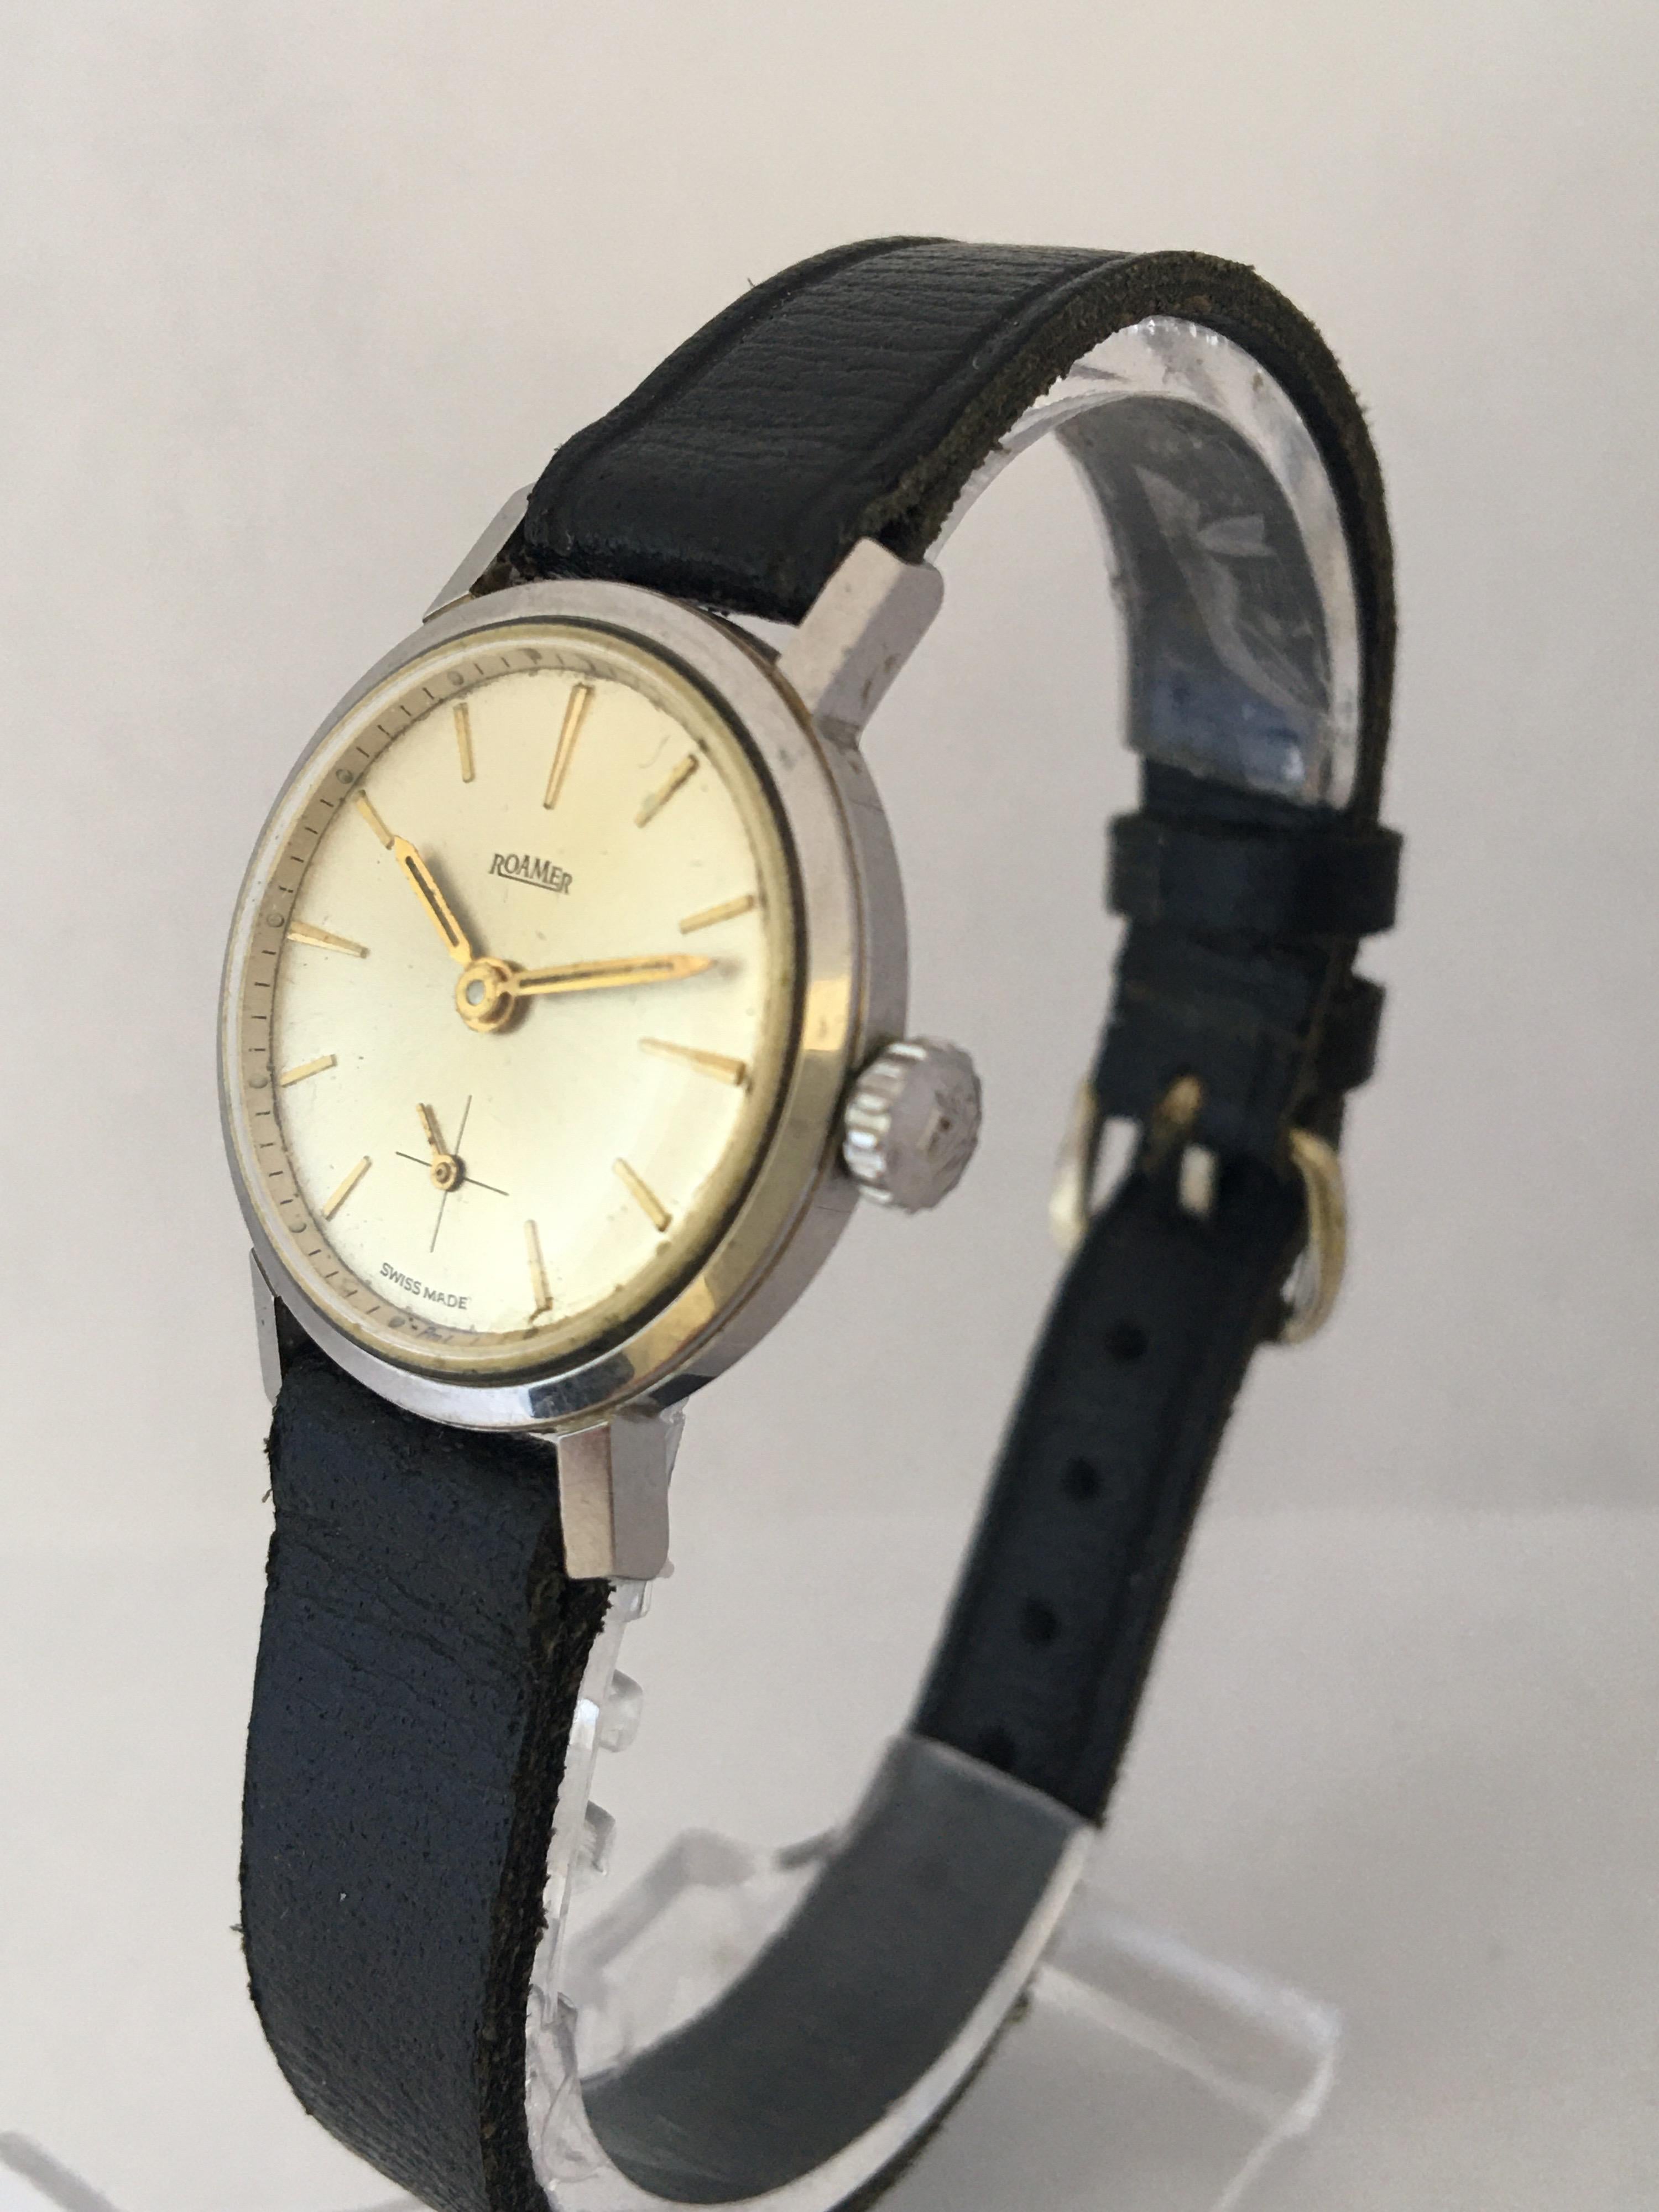 This beautiful 24mm watch diameter pre-owned vintage hand winding watch is in good working condition and it is running well. Visible signs of ageing and wear with light scratches on case as shown.

Please study the images carefully as form part of